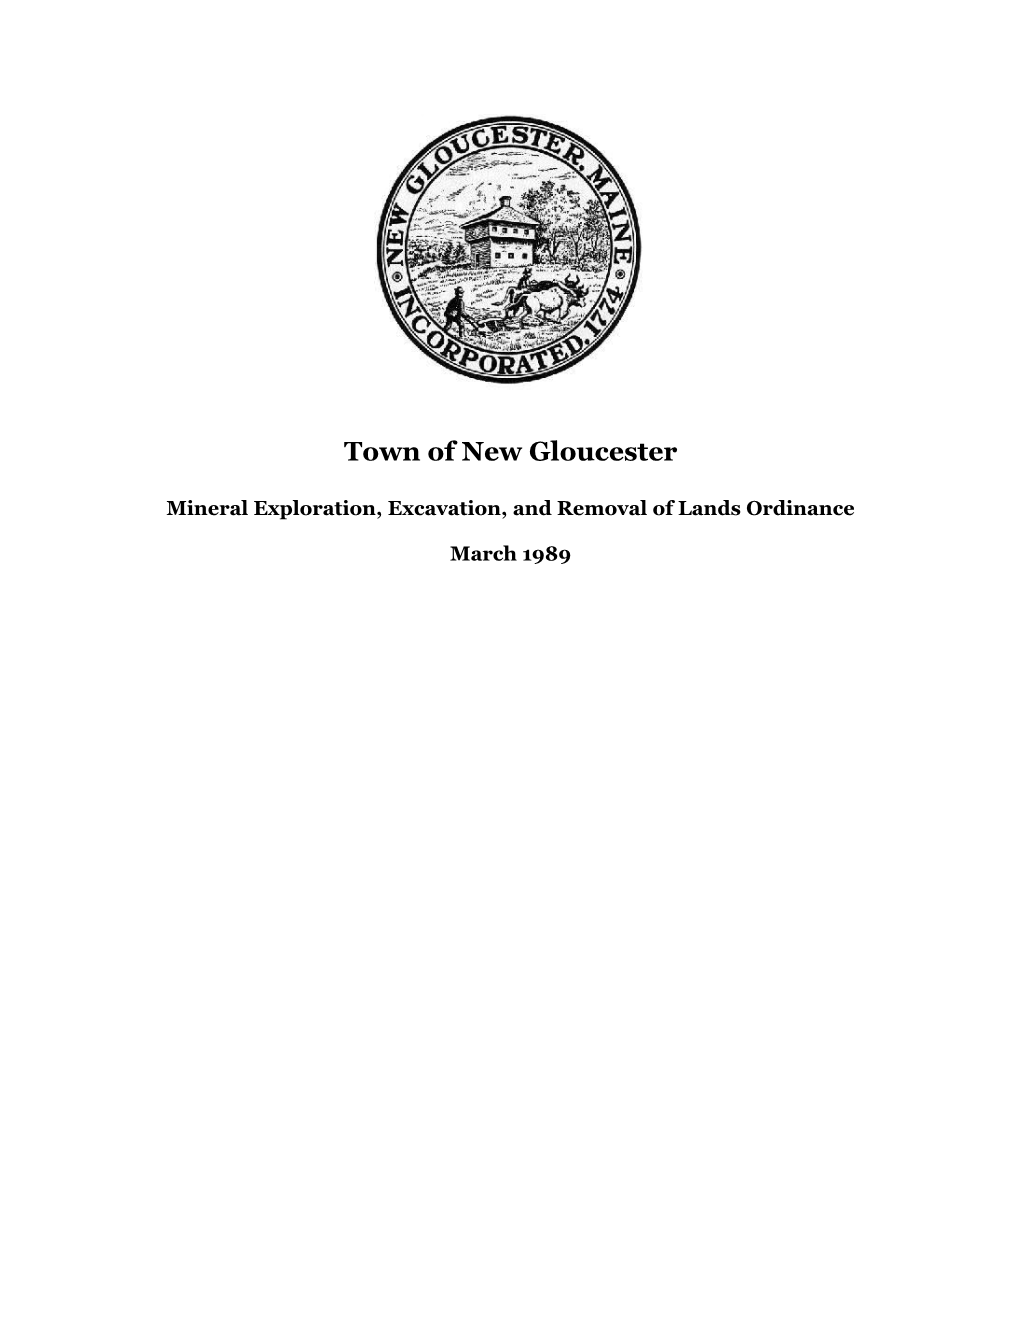 Mineral Exploration, Excavation, and Removal of Lands Ordinance